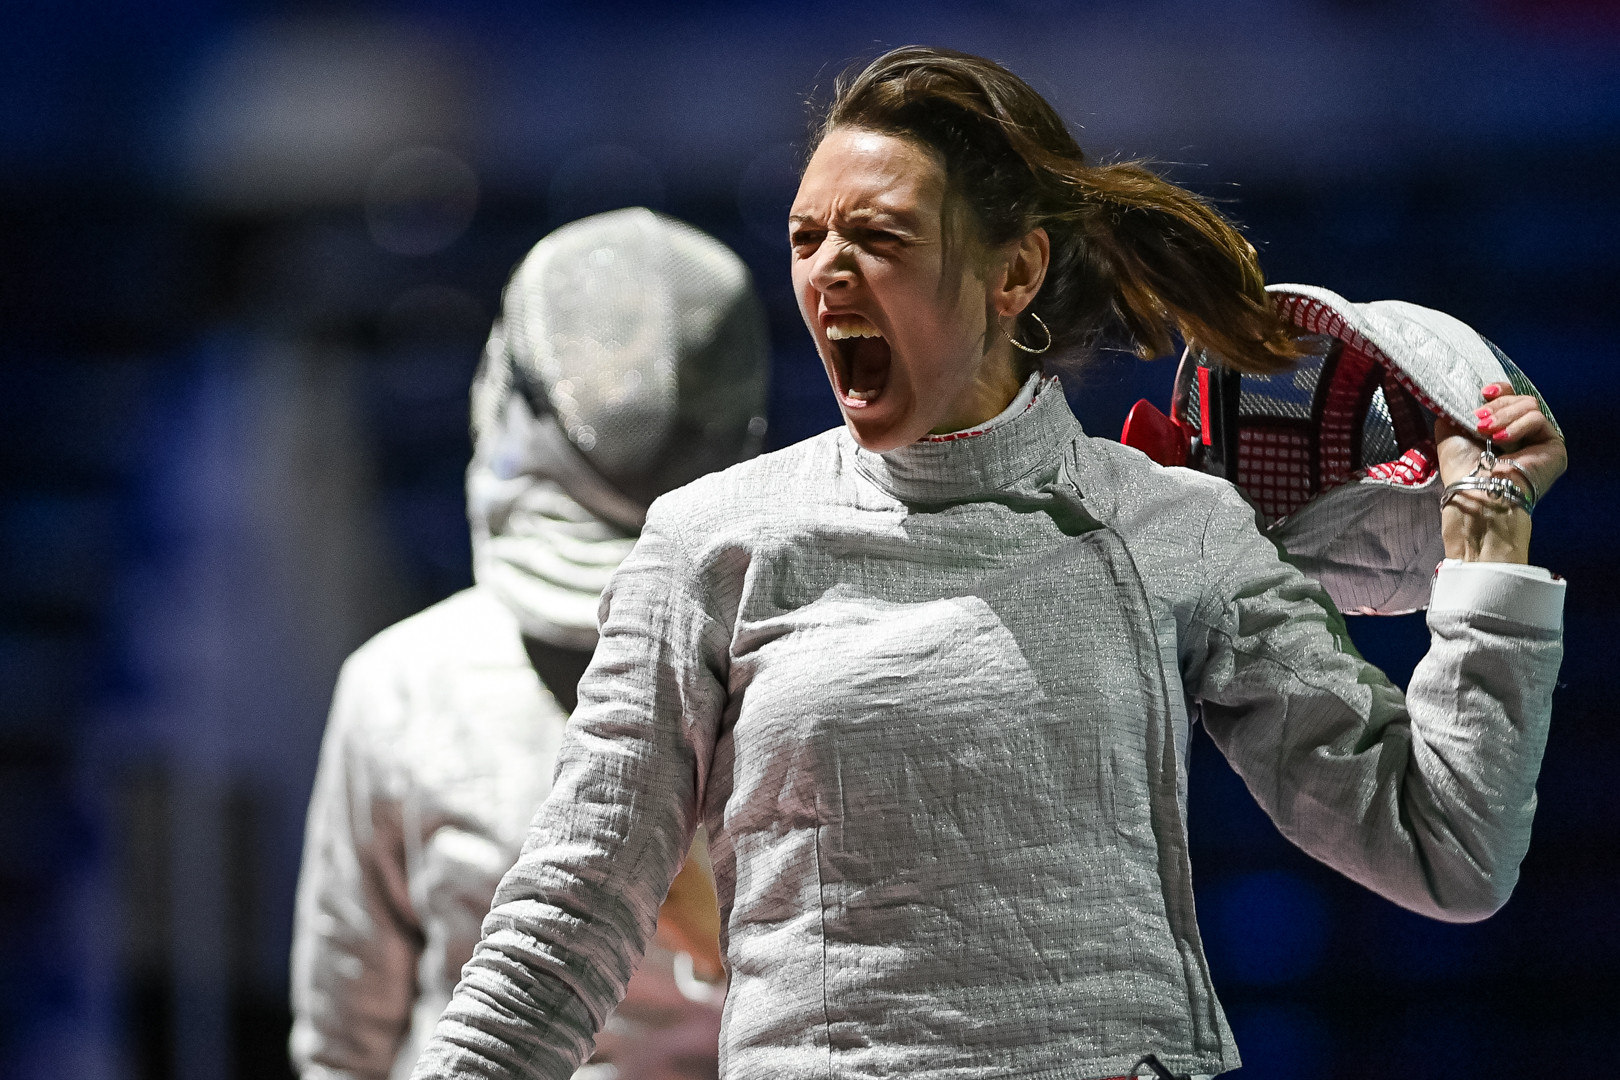 Fencing finishes with third French gold at Kraków-Małopolska 2023